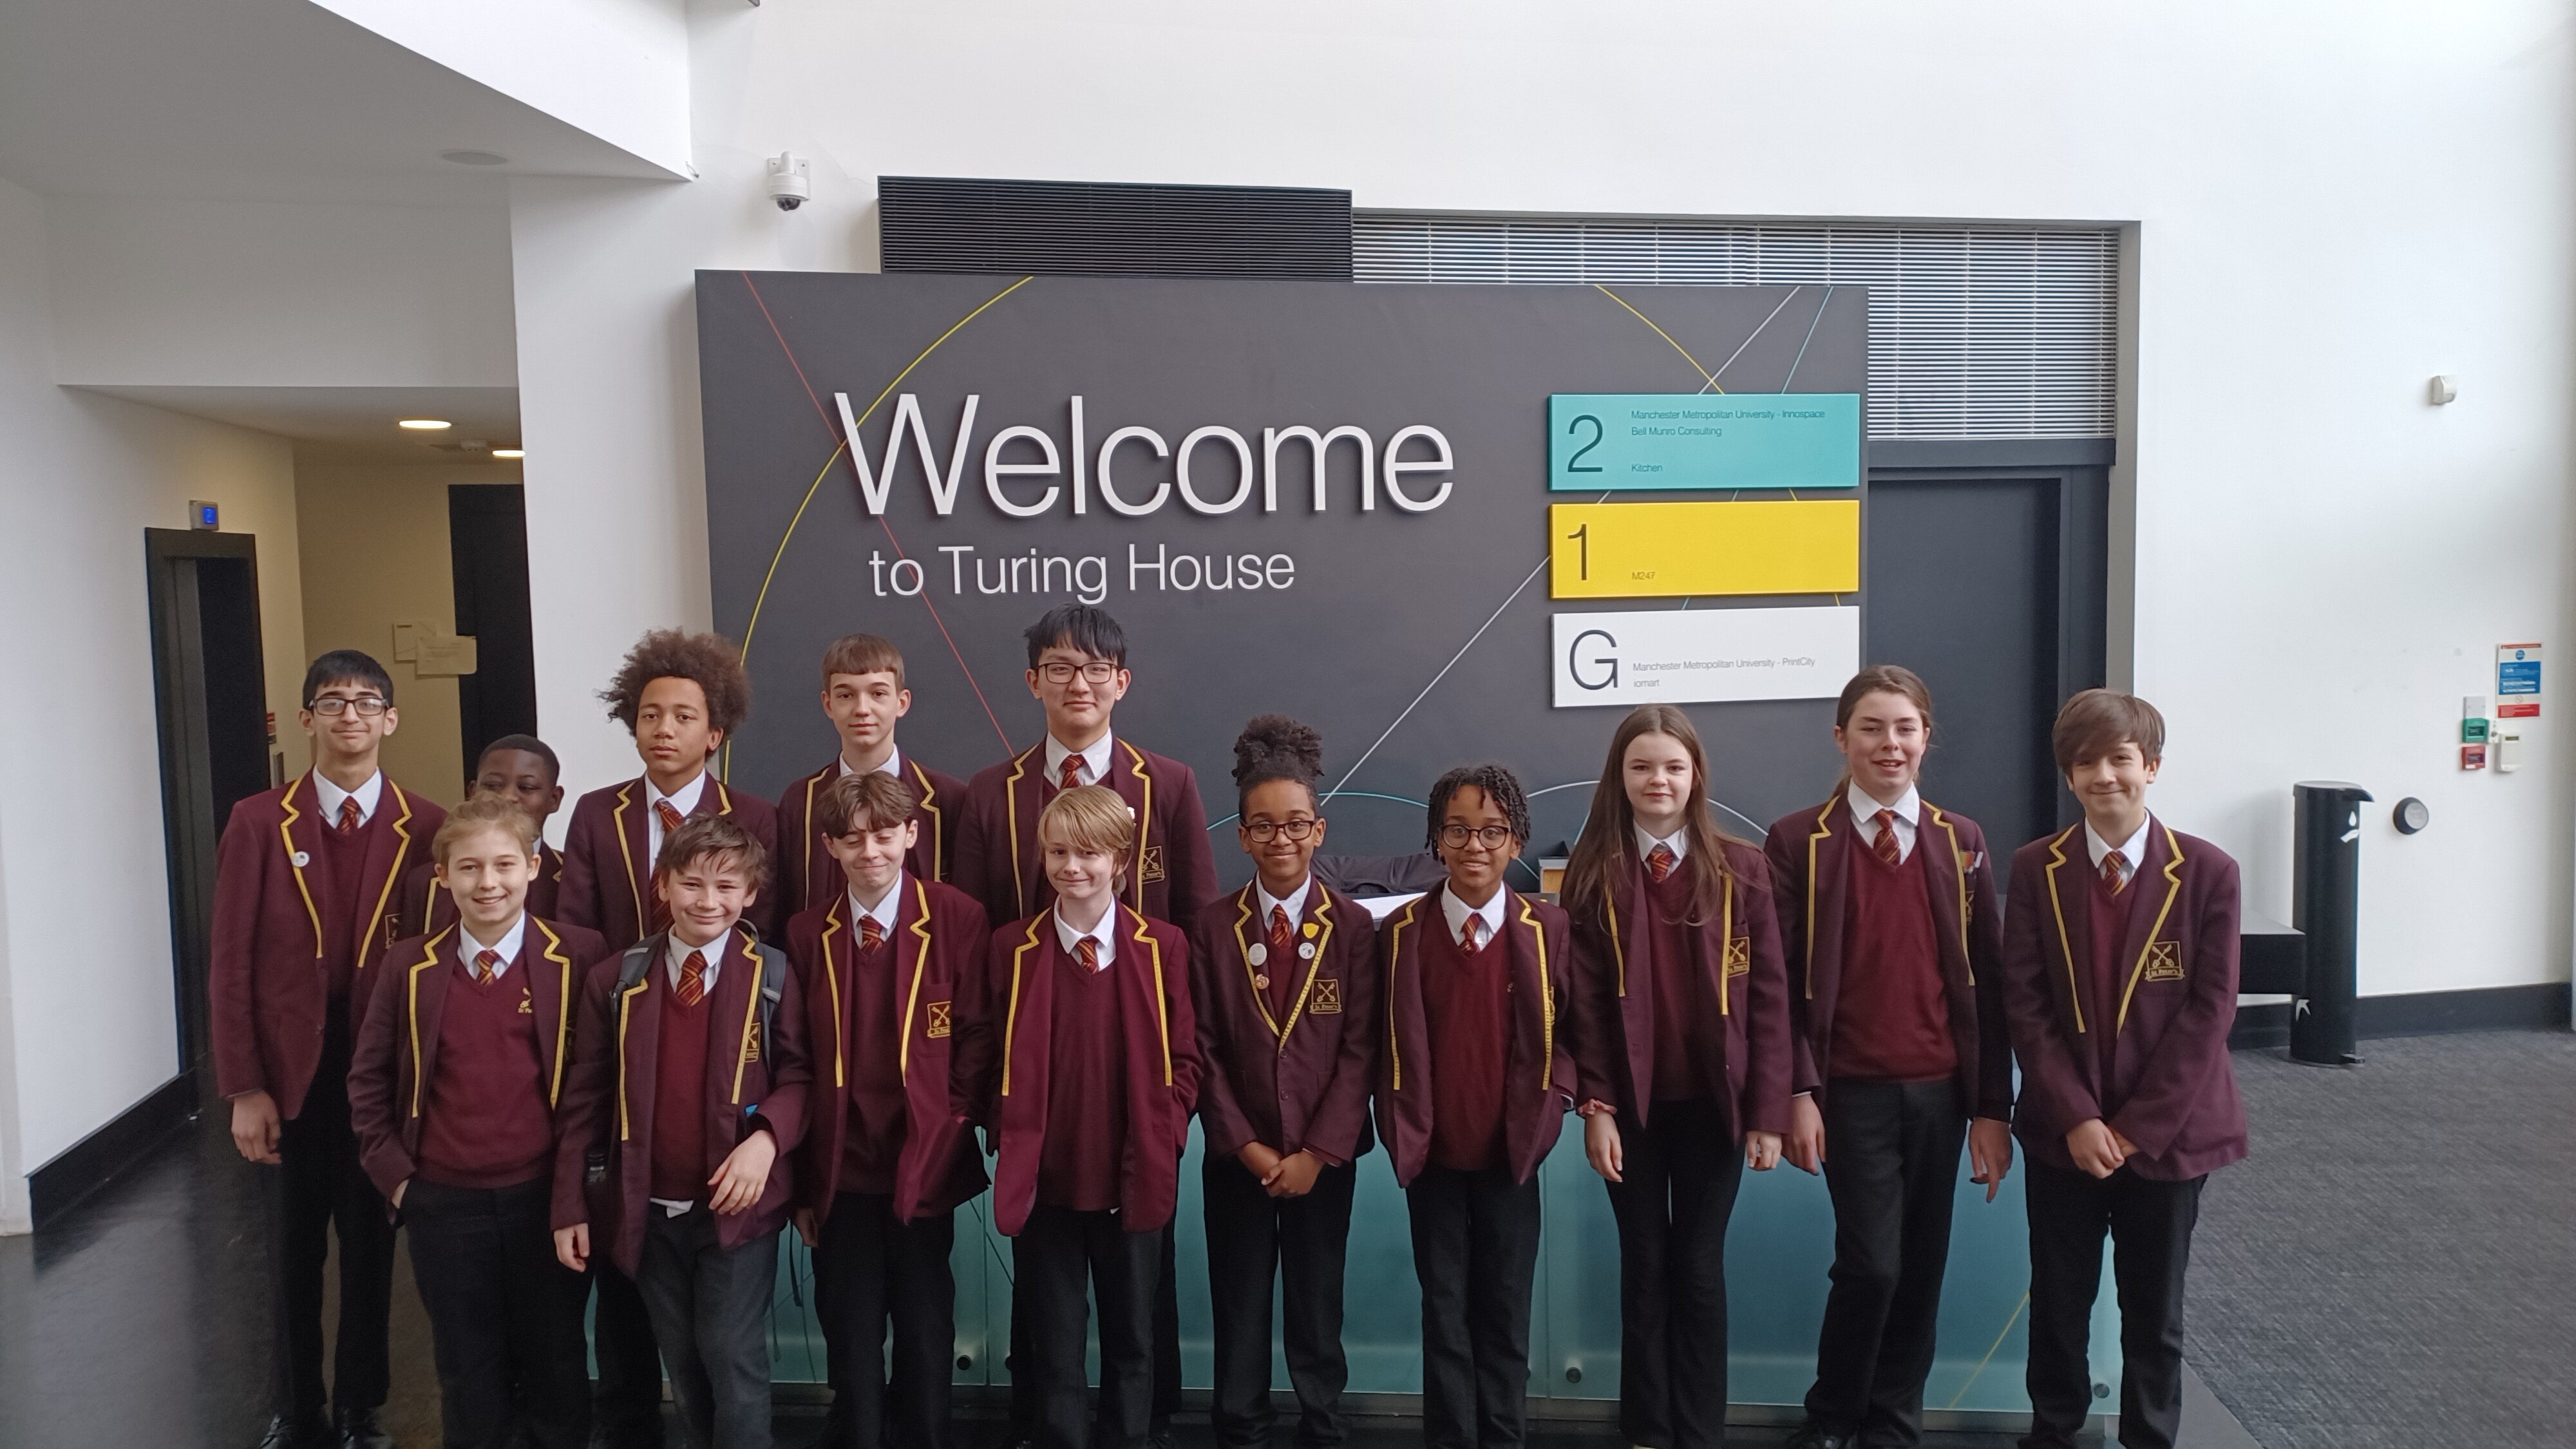 Visit from St. Peters RC High School, Manchester - The PrintCity Blog - Manchester Metropolitan University